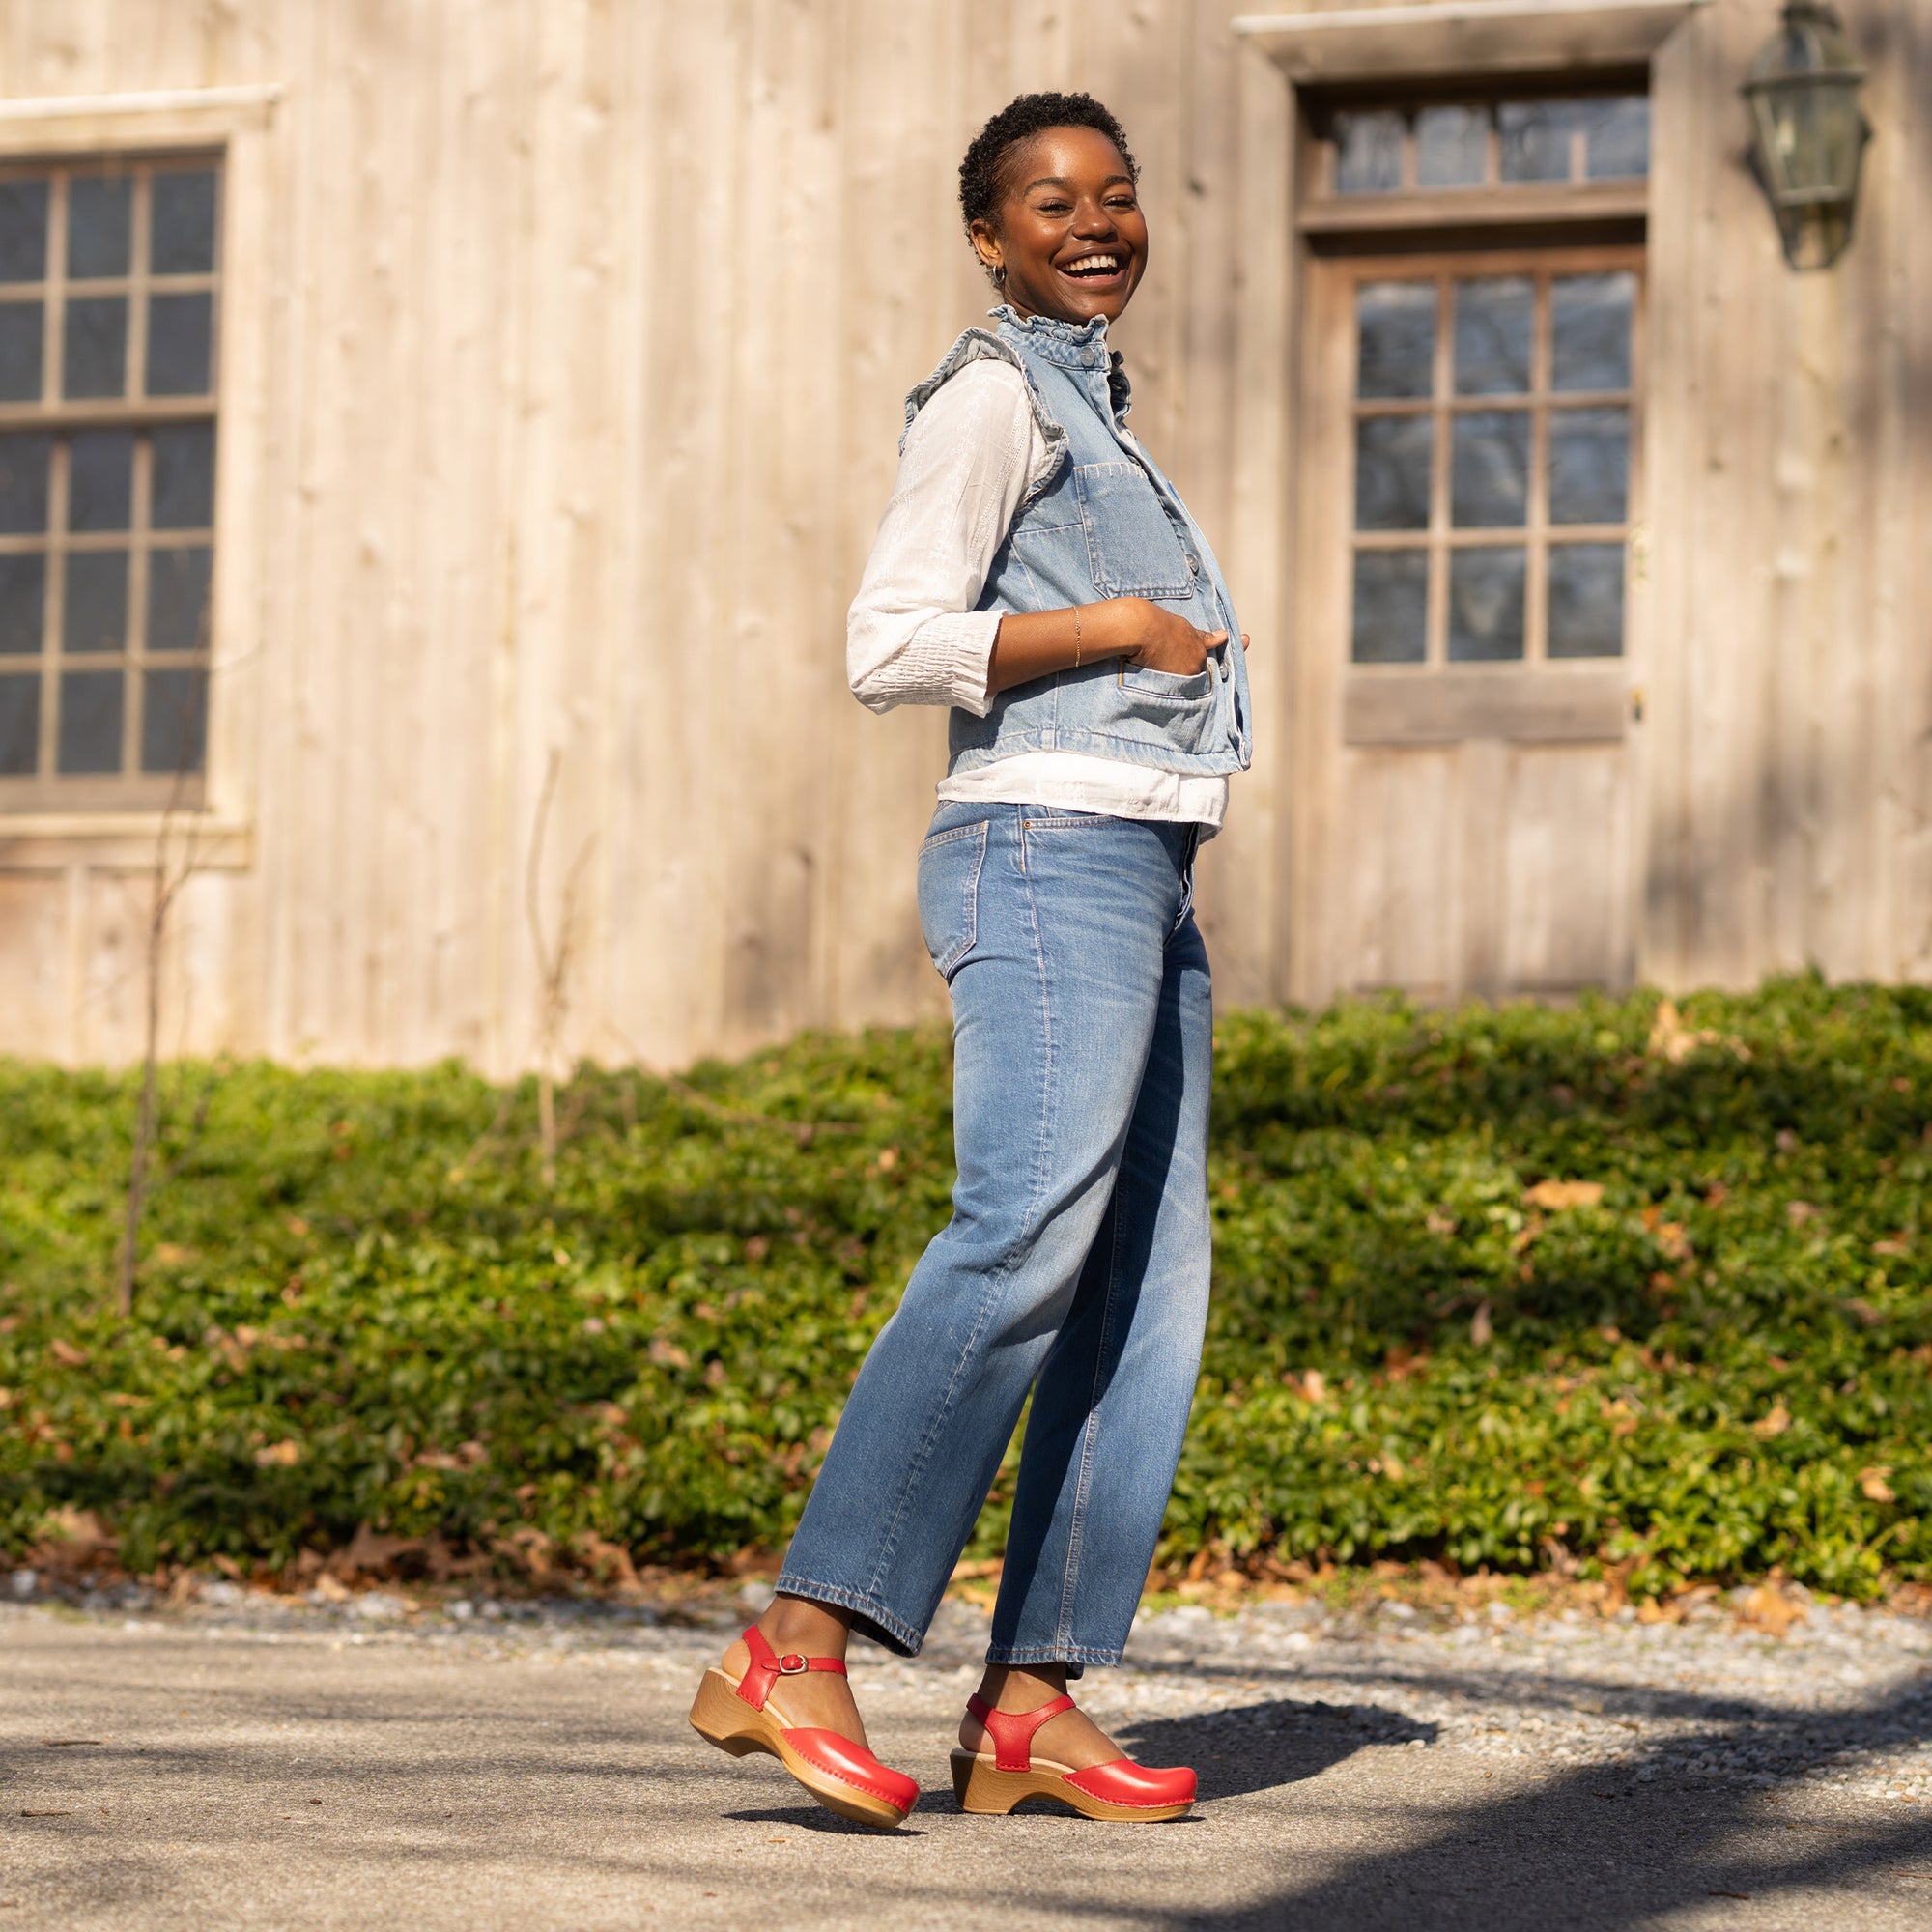 A woman smiling in the sun while wearing a denim outfit and red Mary Jane clogs.